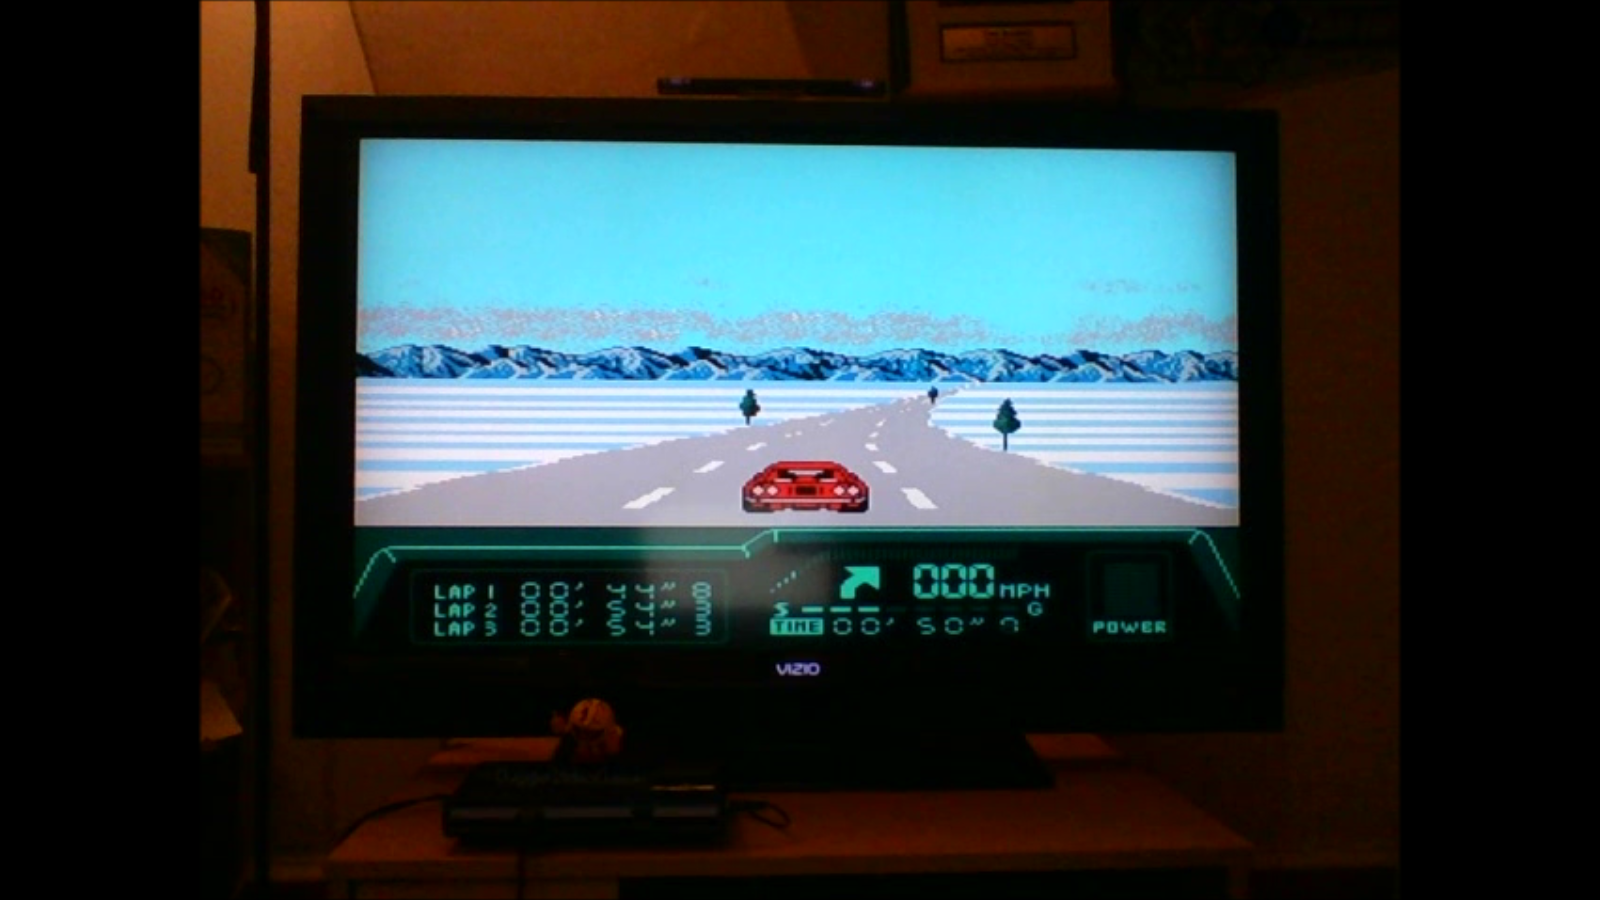 DuggerVideoGames: Rad Racer 2: Stage 6: Rocky Mountains [Fastest Lap] (NES/Famicom Emulated) 0:00:44.8 points on 2016-08-24 00:01:47